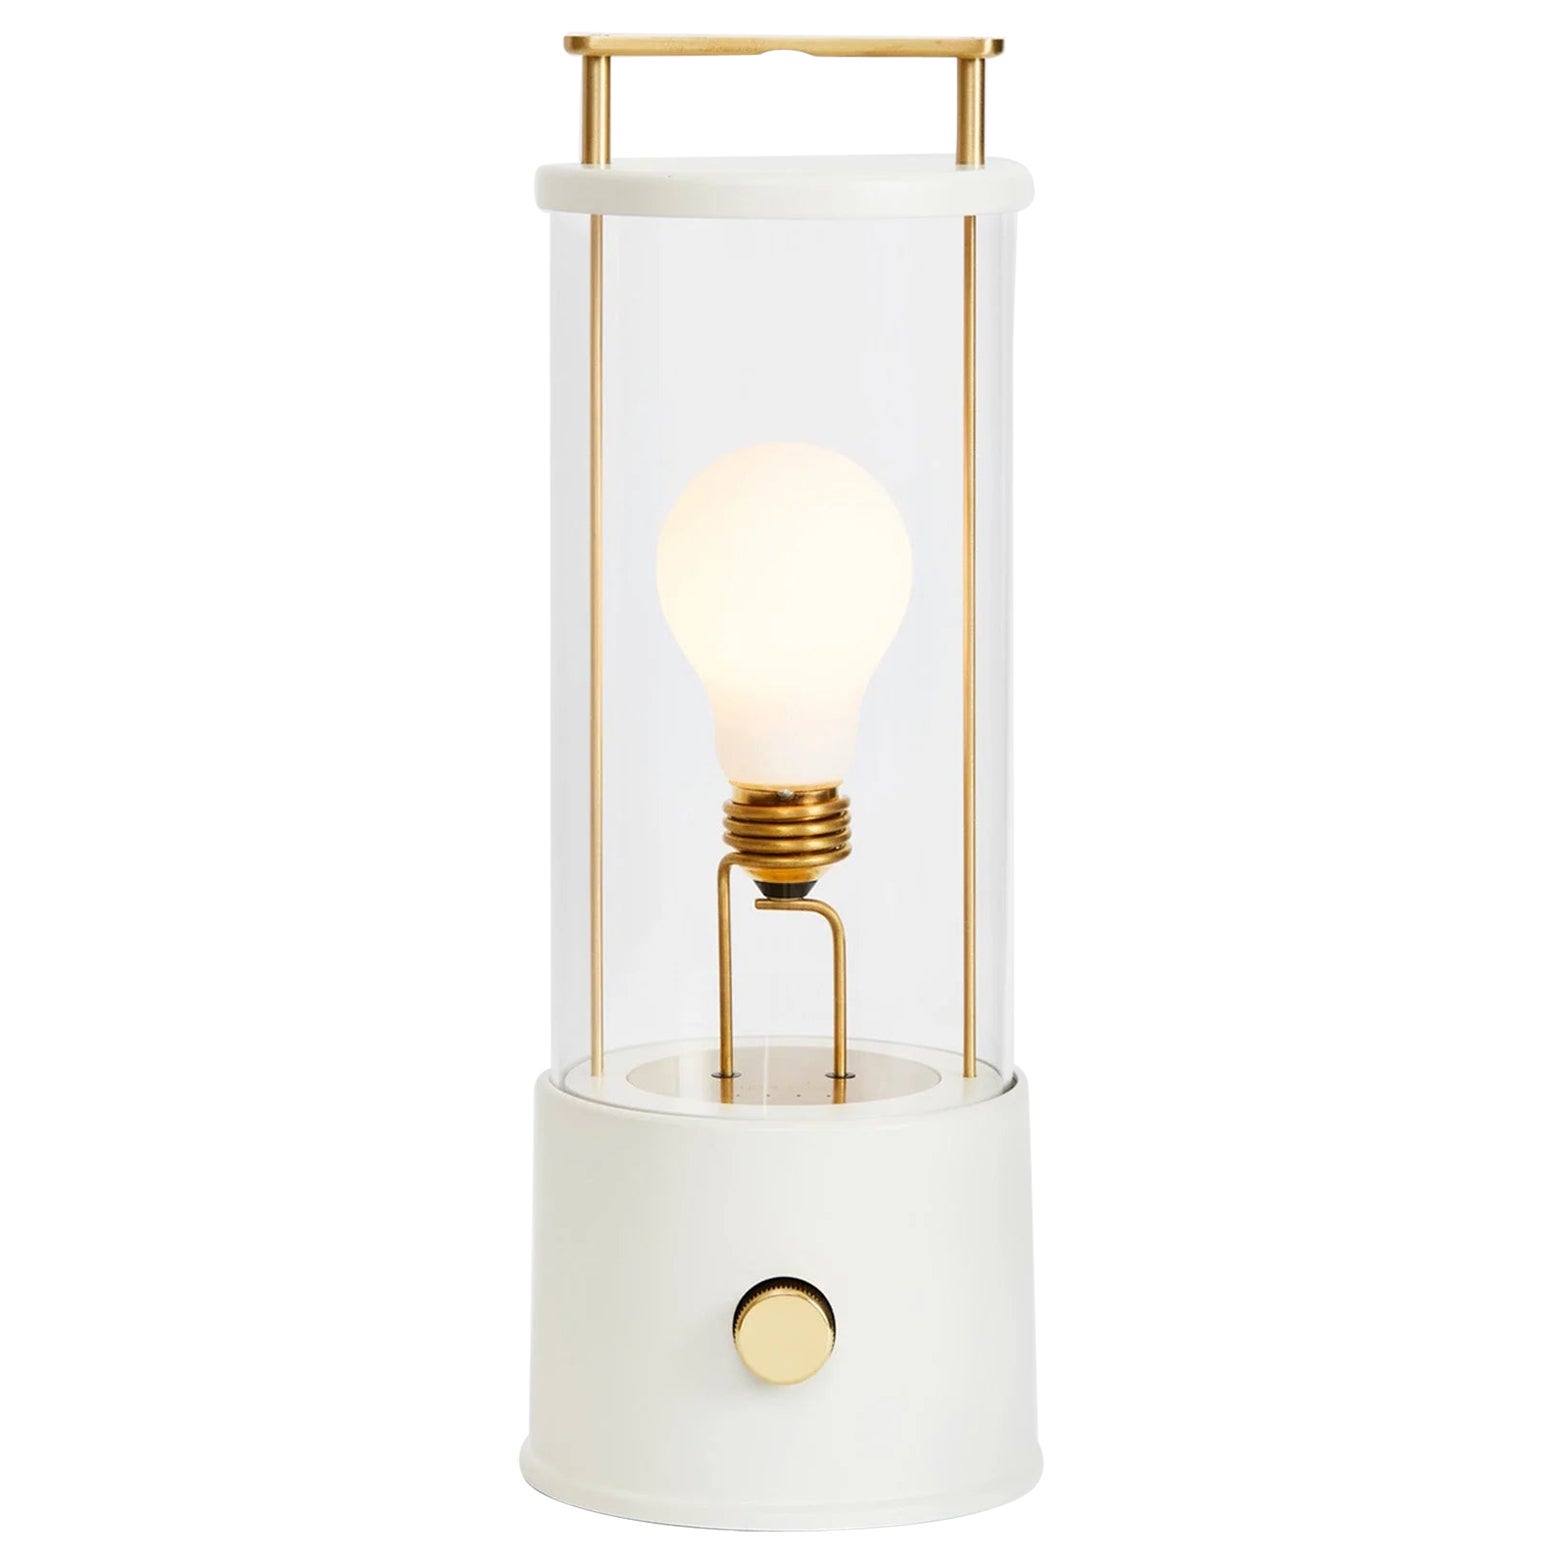 'The Muse' Portable Lamp by Farrow & Ball x Tala in Candlenut White